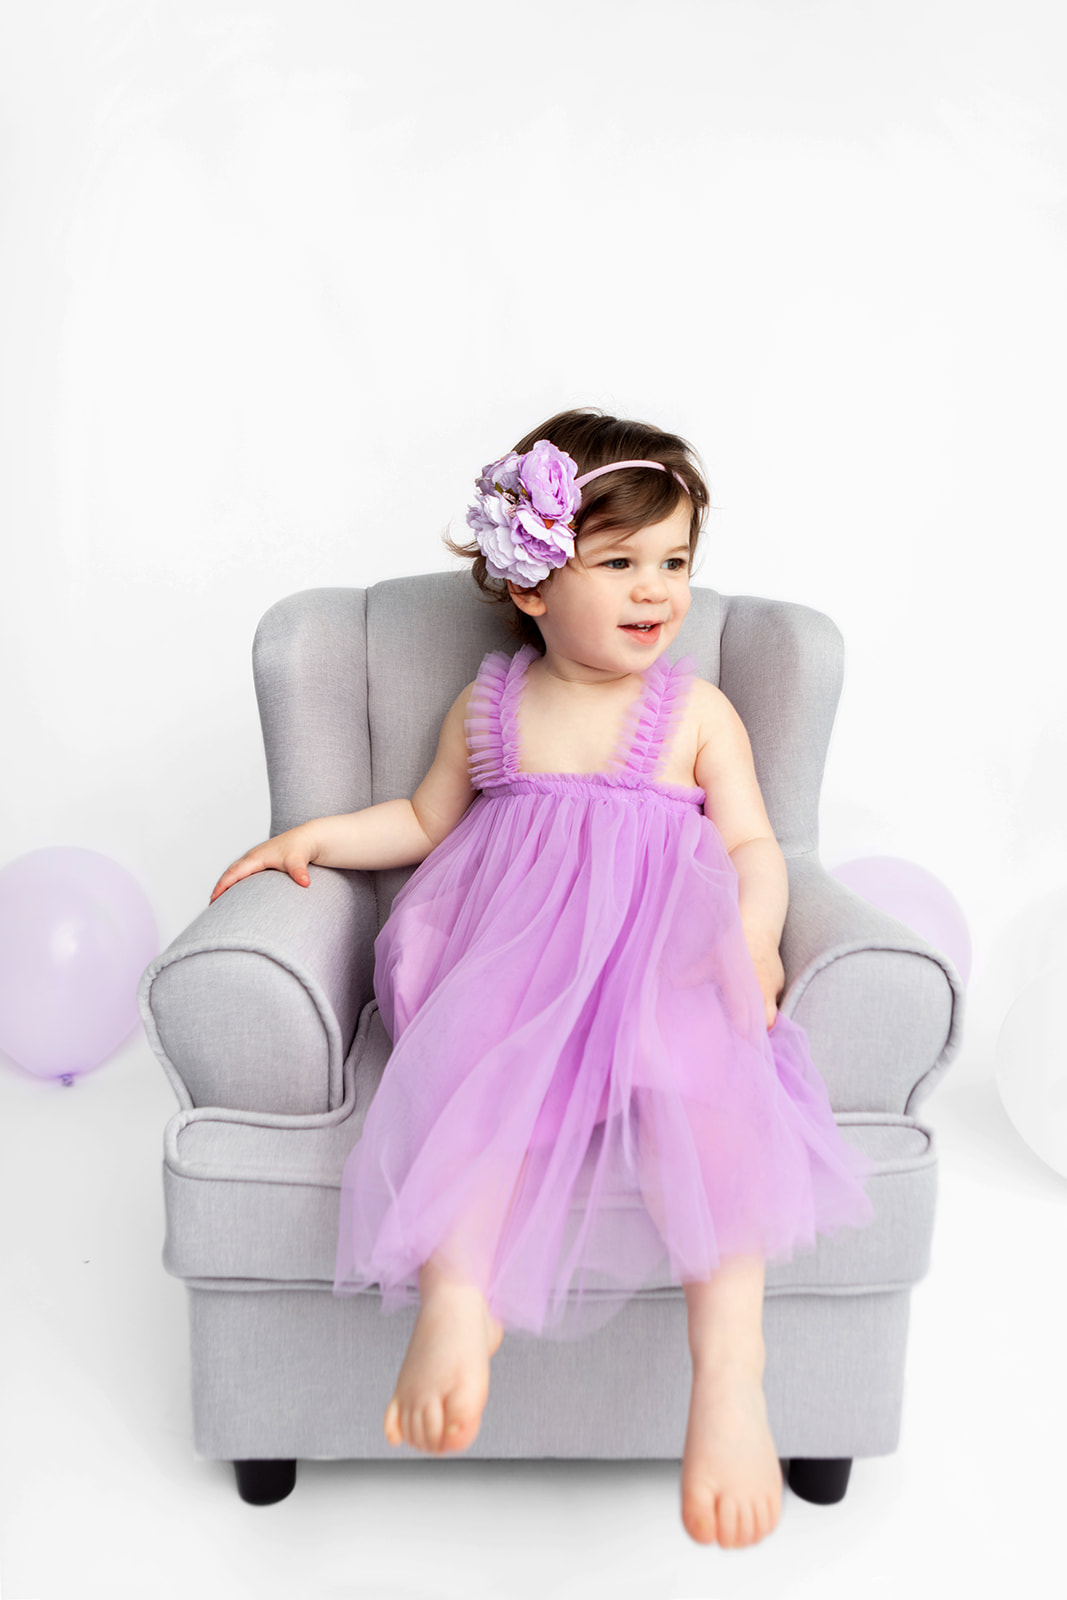 A cute little girl is photographed in motion, bare feet swinging from a gray tweed easy chair that's just her size. She smiles off-camera and her light purple party dress and large floral headband really pop, in this studio toddler milestone session photographed by Looking Up Photography, New York's Trusted Baby Photographer.